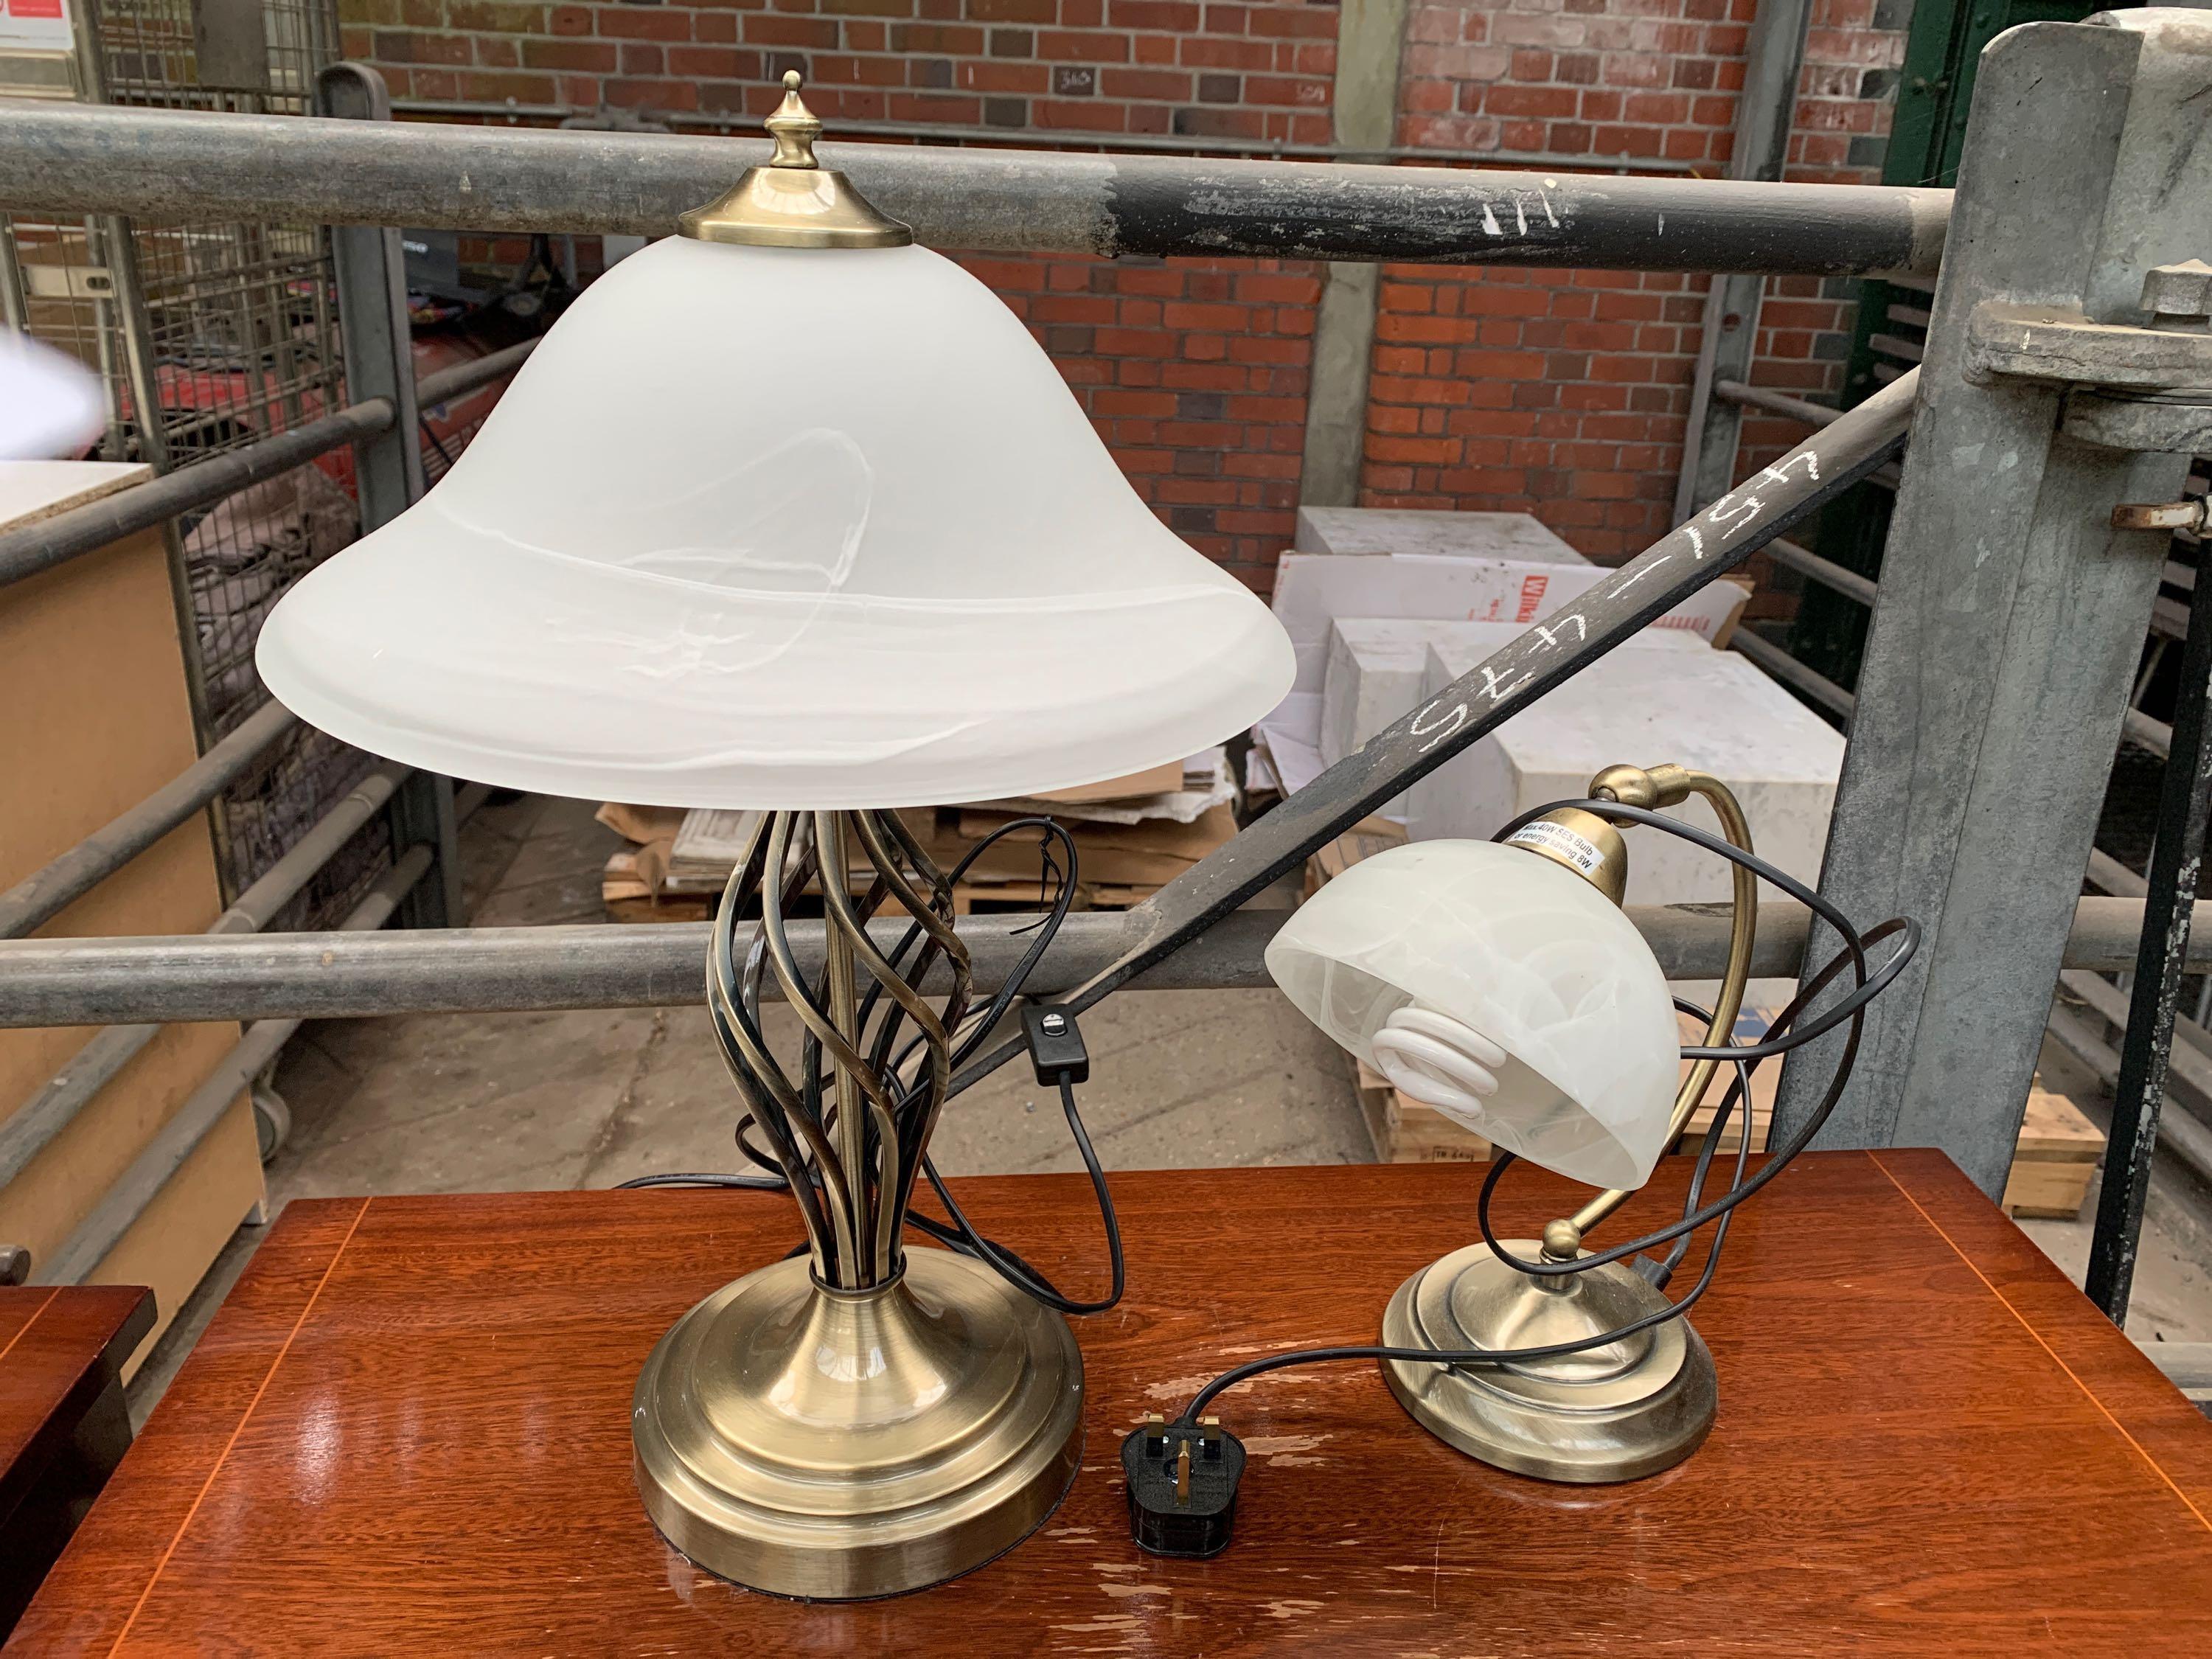 A table lamp and a reading lamp